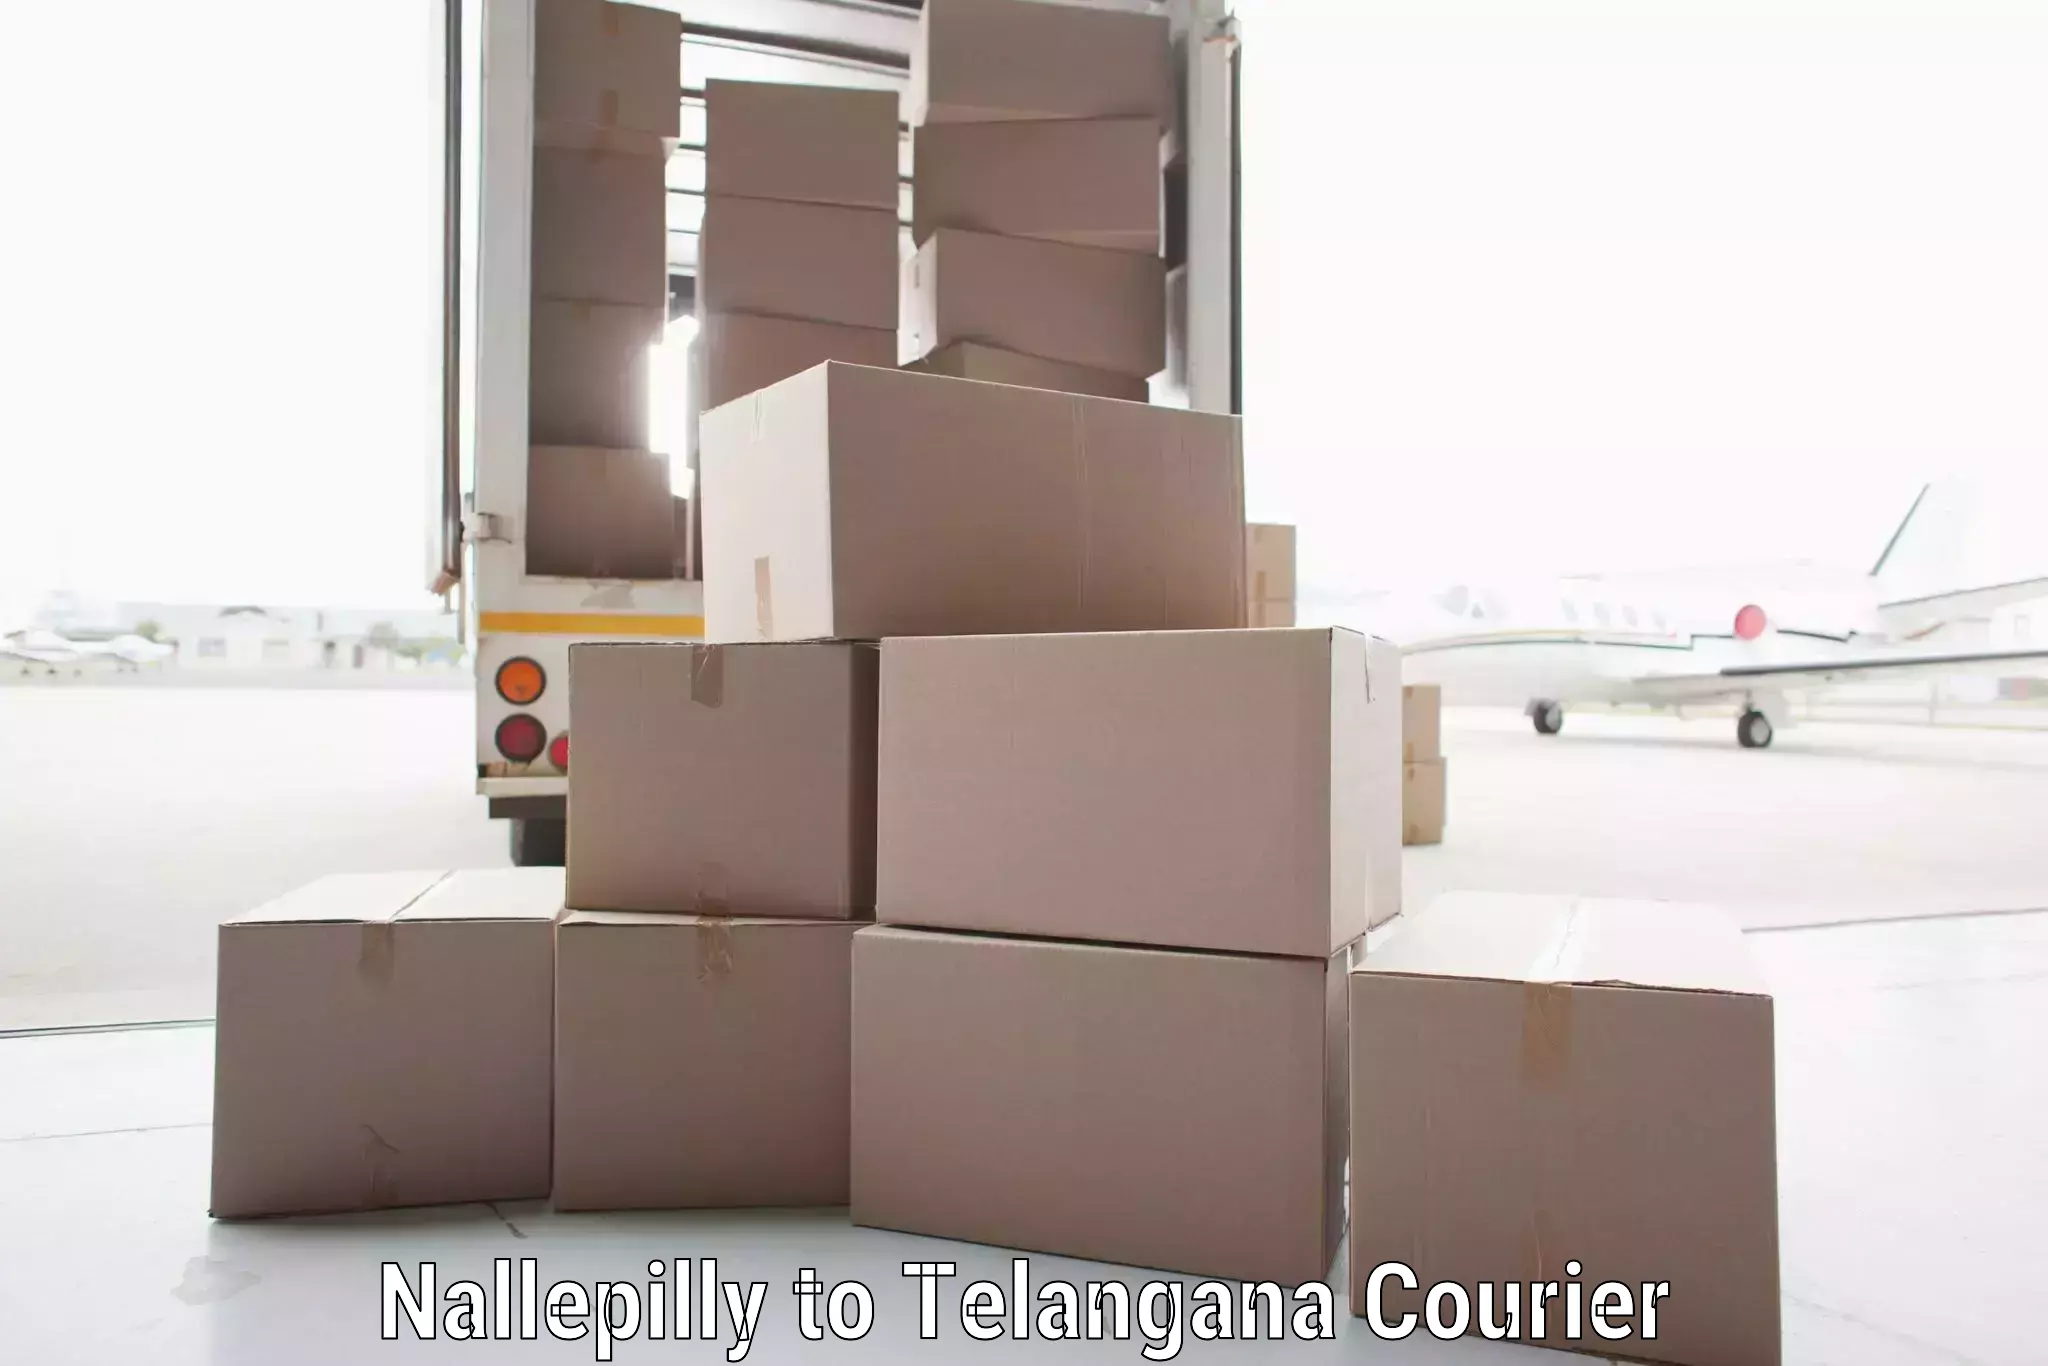 High-capacity parcel service in Nallepilly to Kosgi